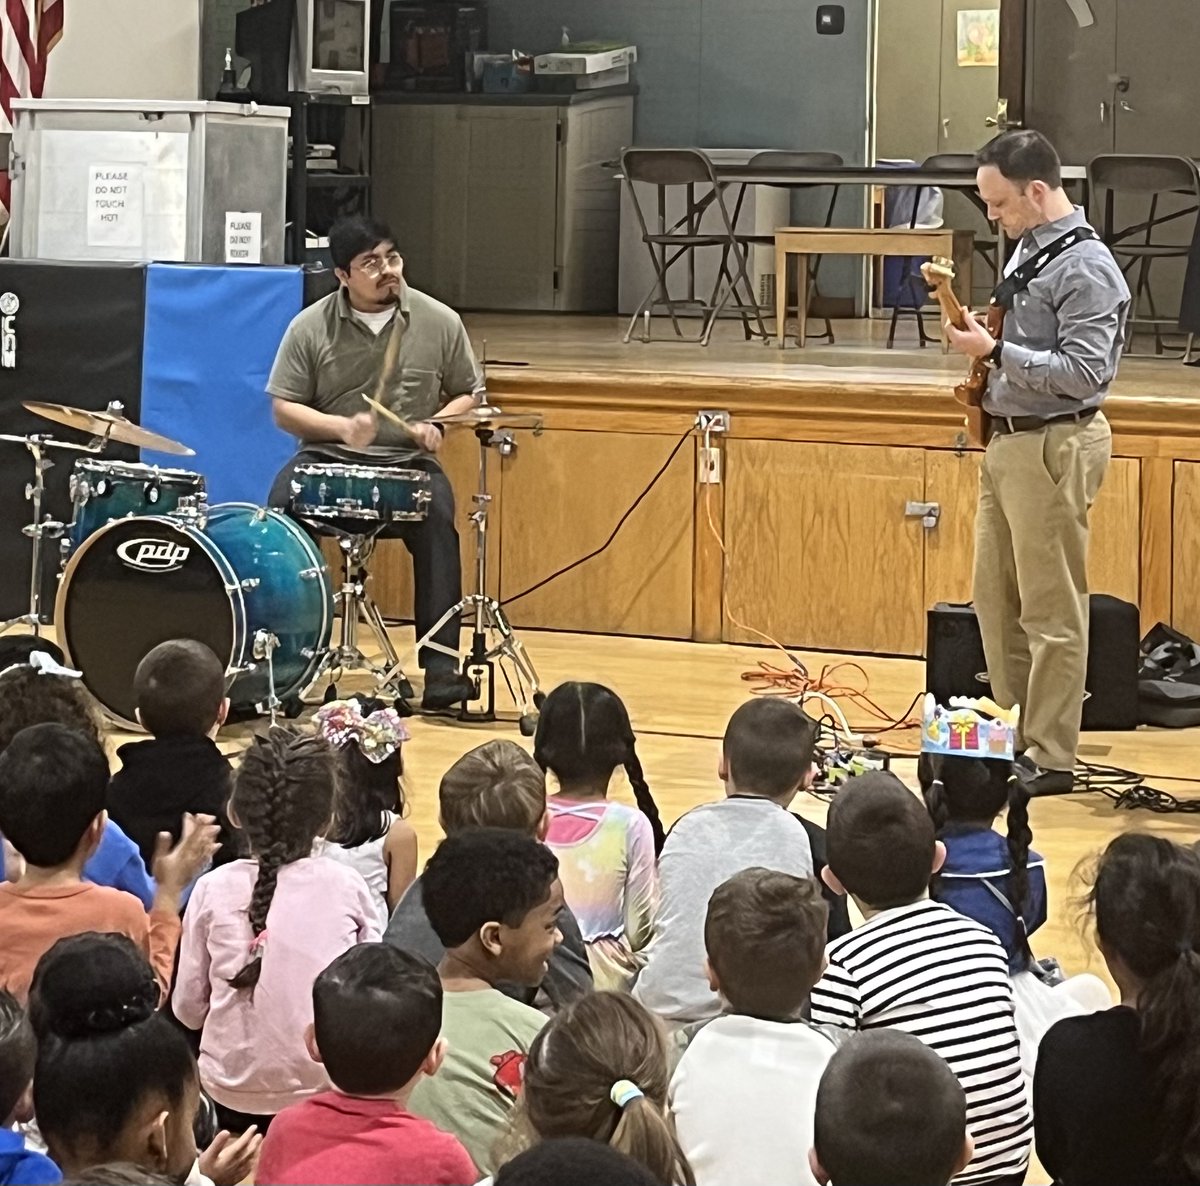 #Tbt to a very cool 'concert' with Doyle's favorite music teachers jamming together during #MusicInOurSchoolsMonth 🎸🥁🎶